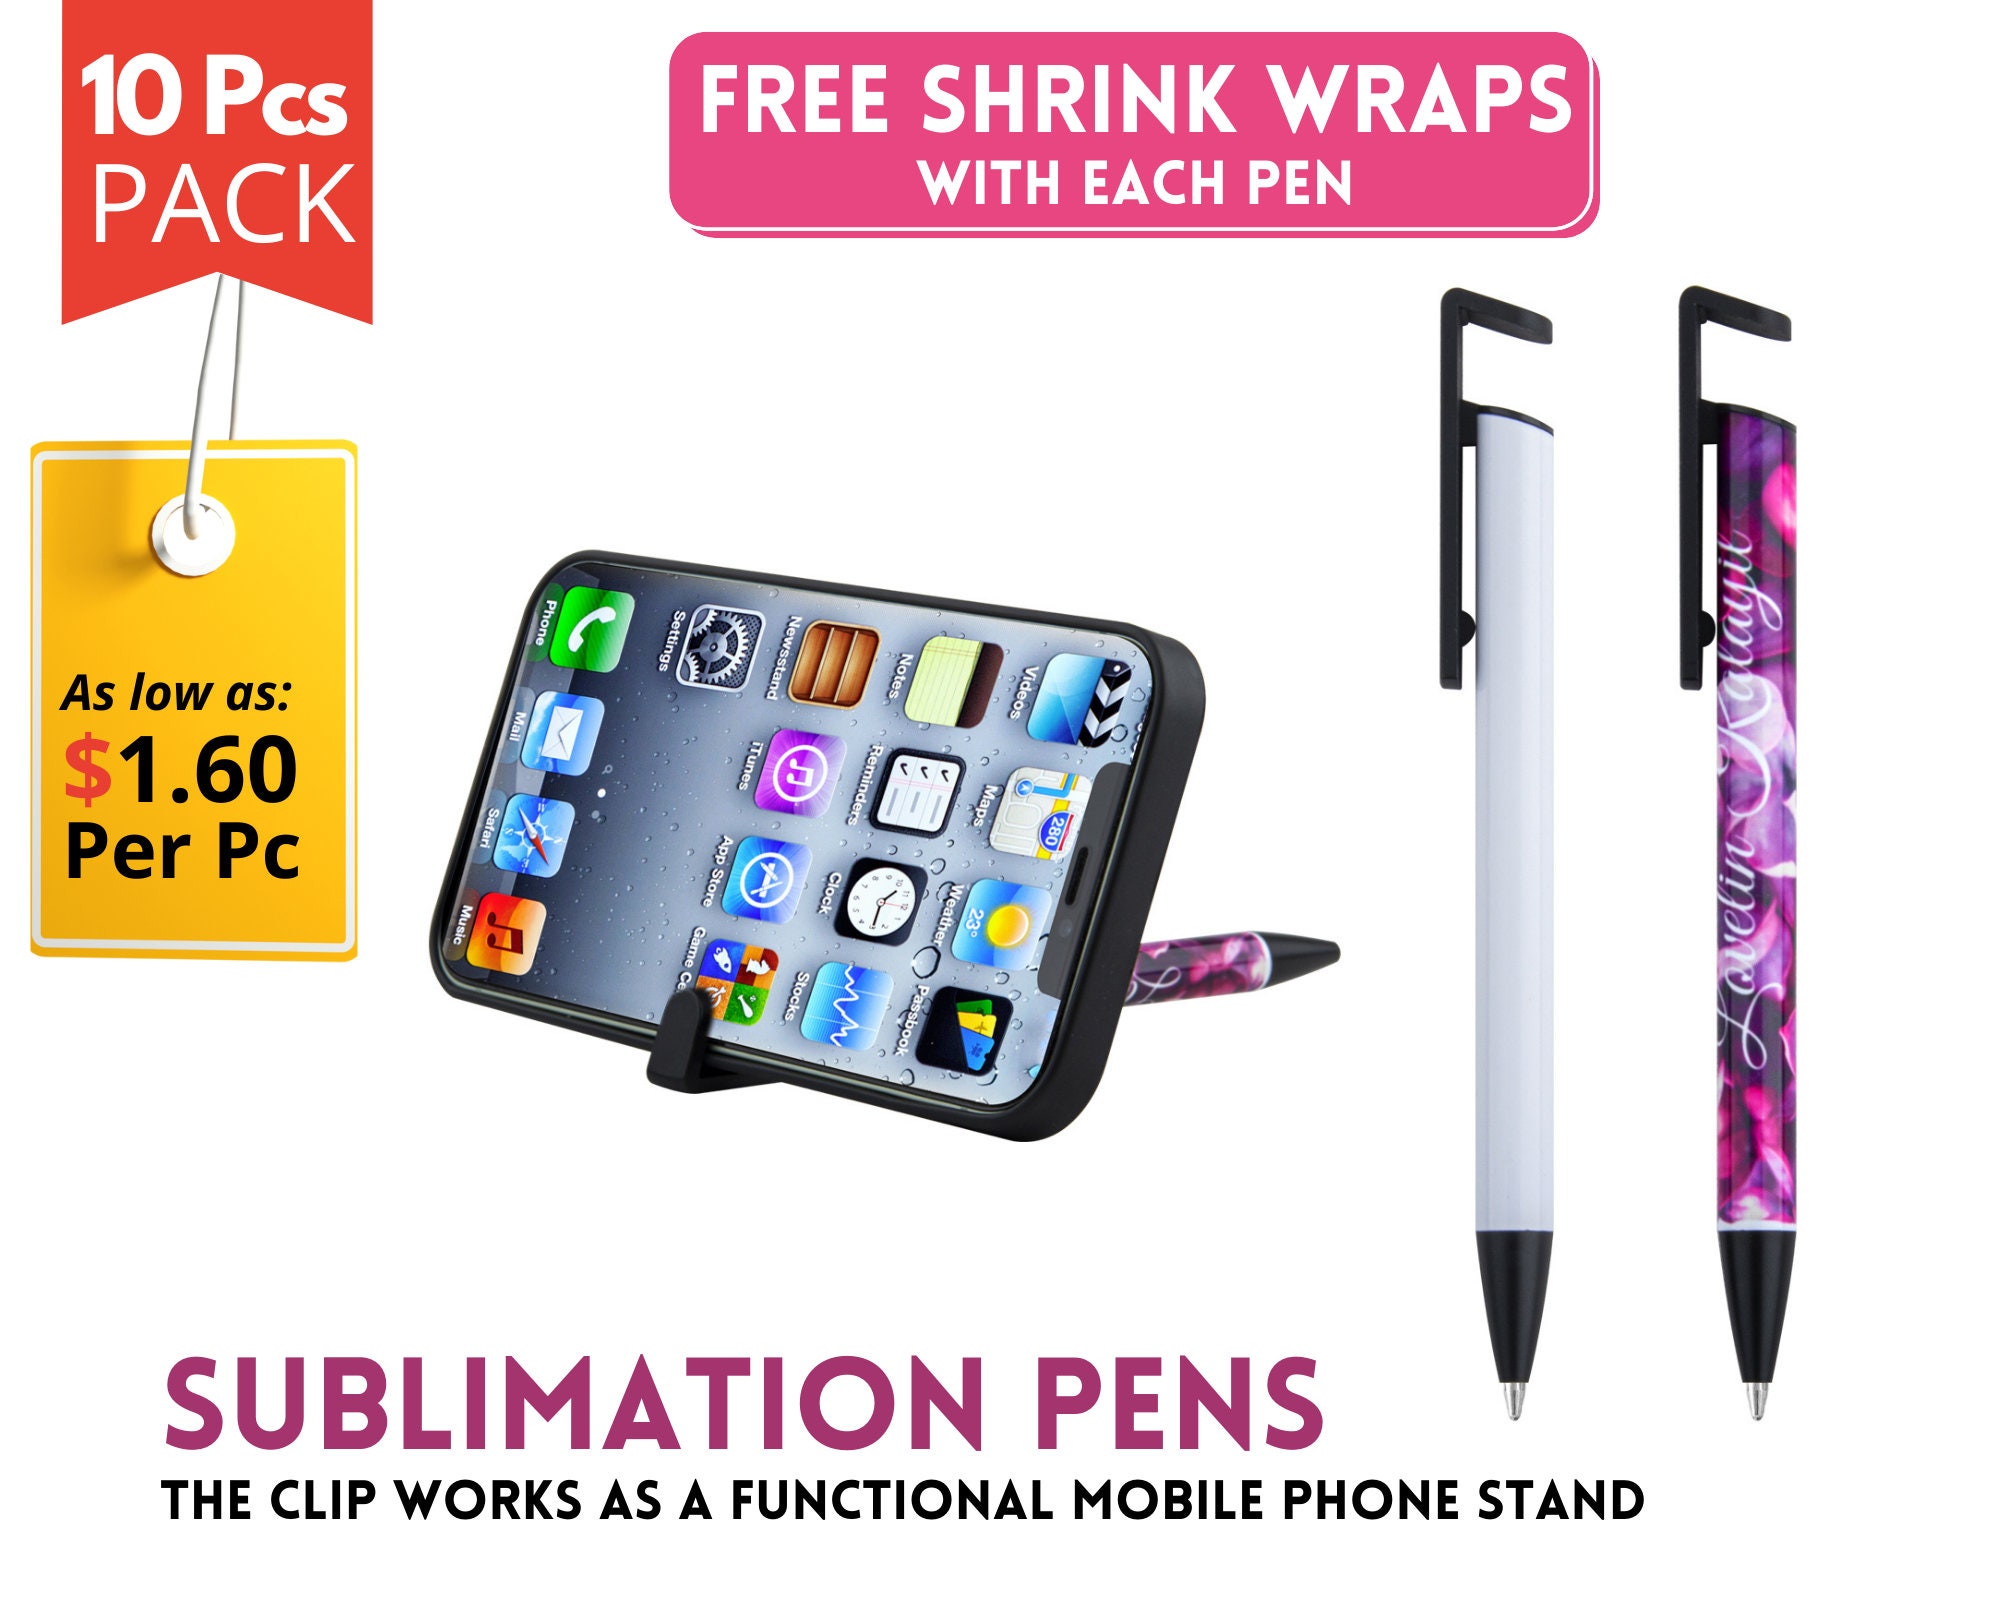 12Pc Sublimation Pens Blank with Shrink Wrap Coated Aluminum Tube Body and  Sublimation Shrink Wrap for DIY Office School 